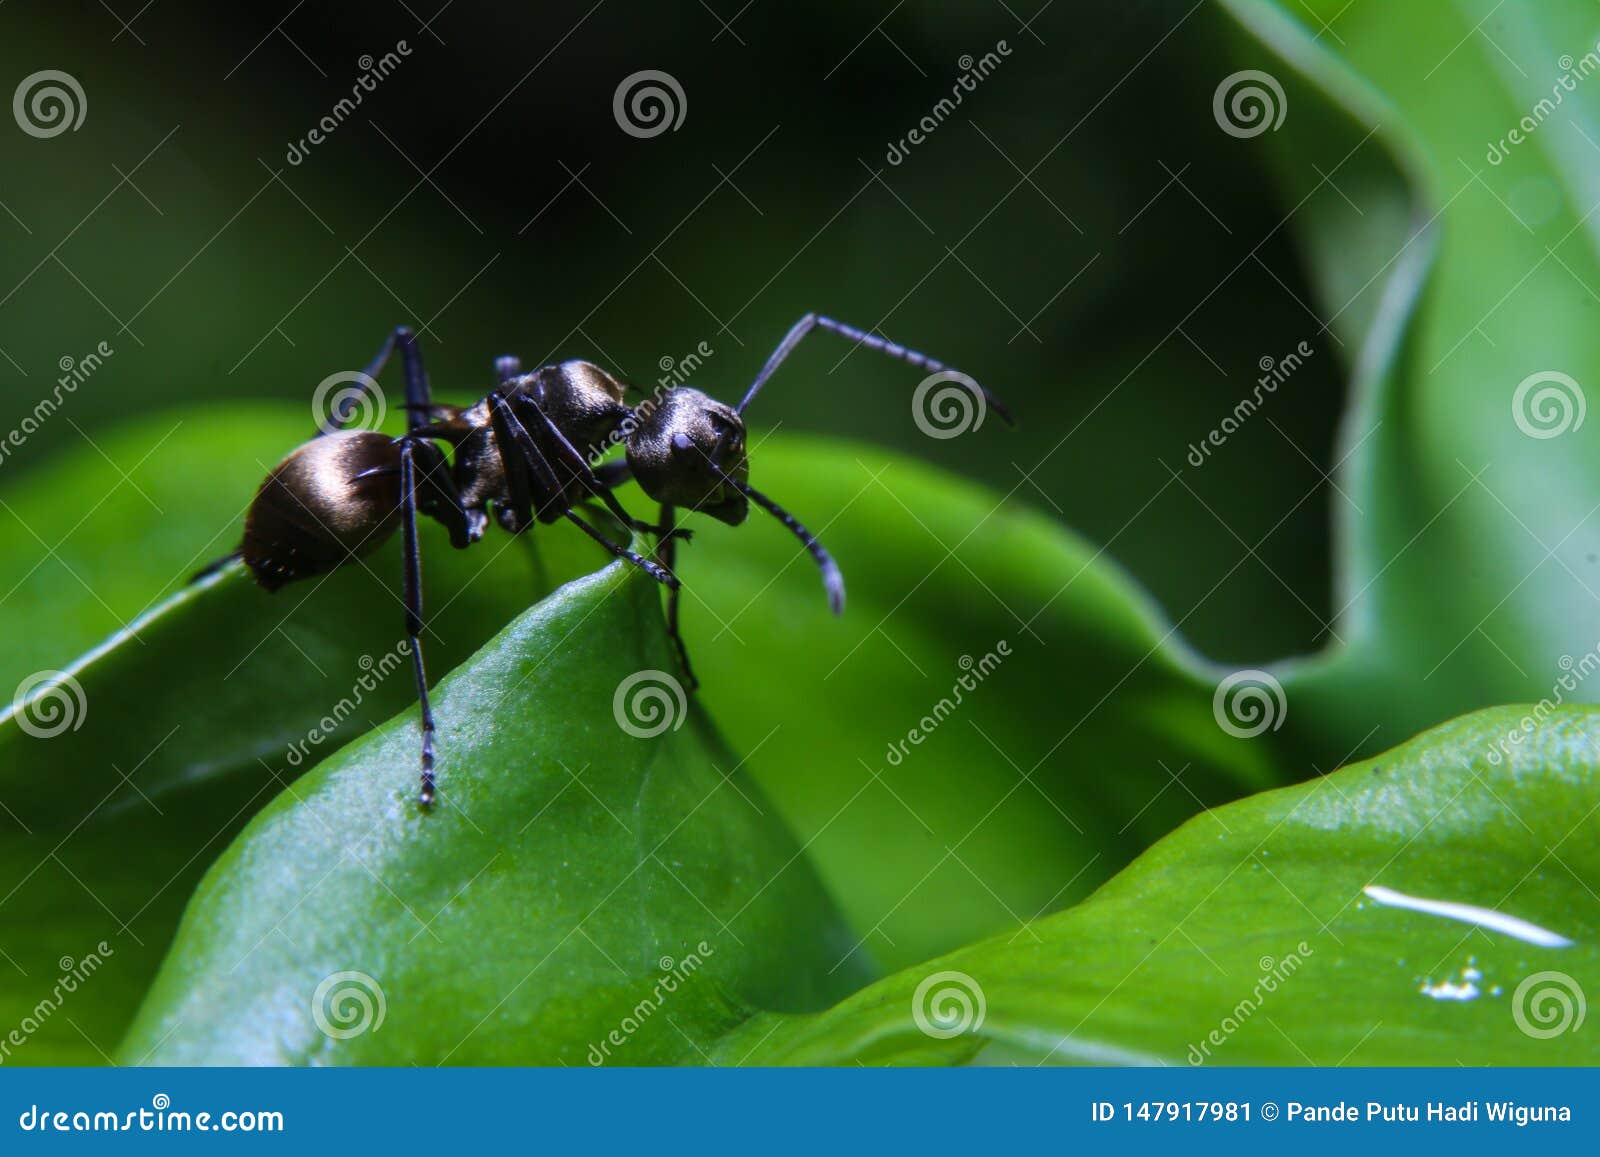 Gold Digging Ant Stock Photos and Pictures - 8 Images